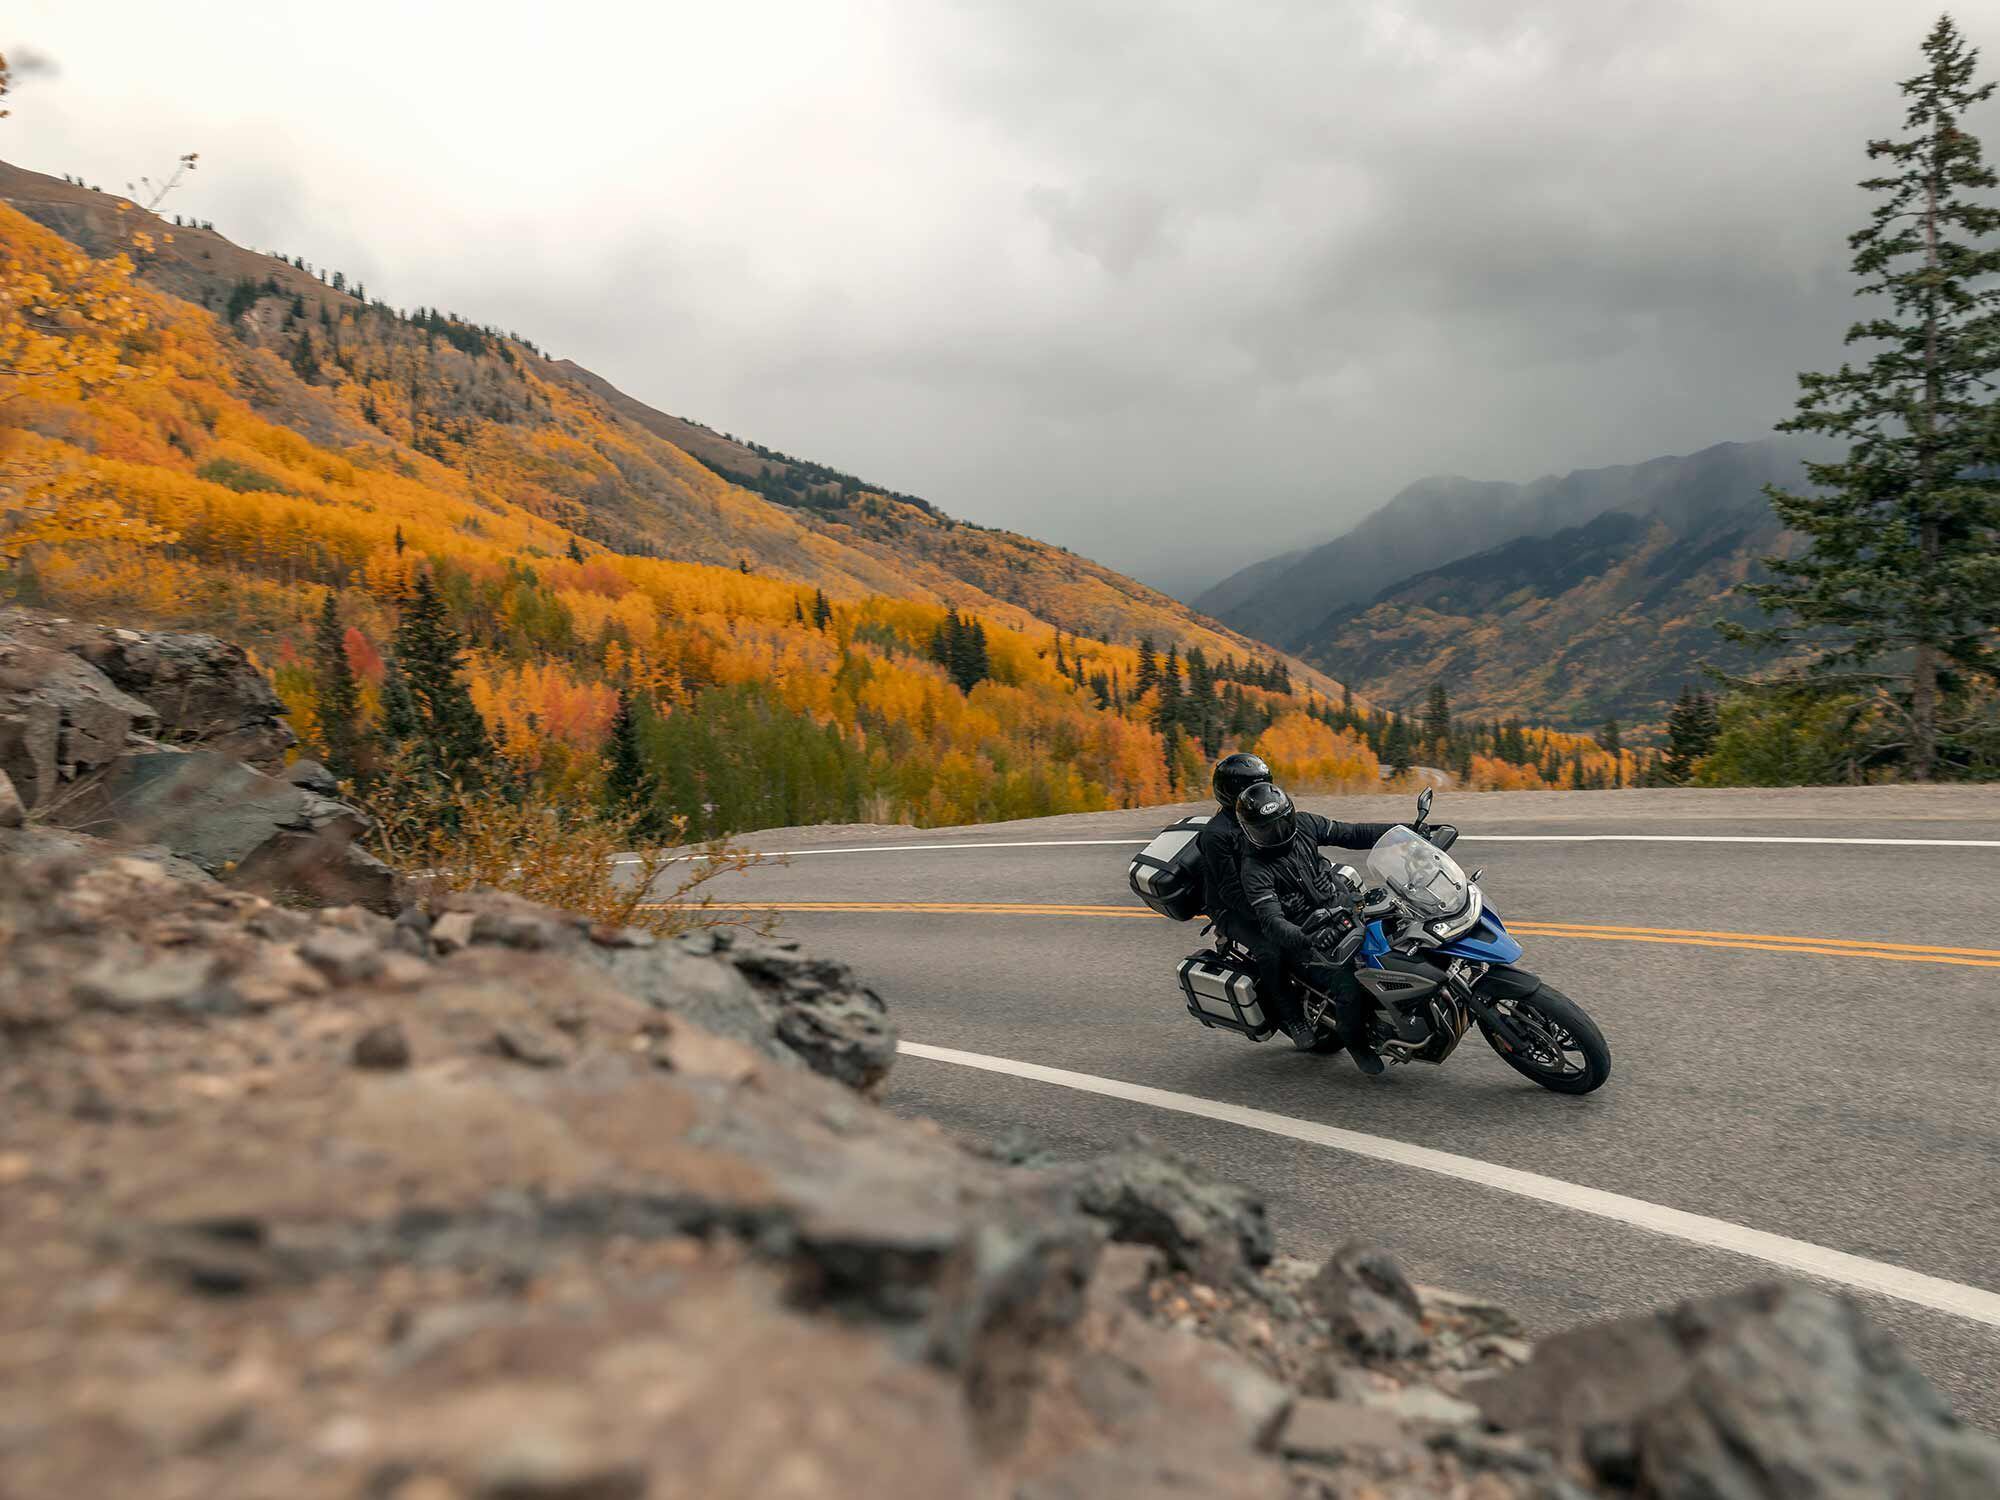 The Triumph Tiger GT Explorer is dialed for road-focused adventure.